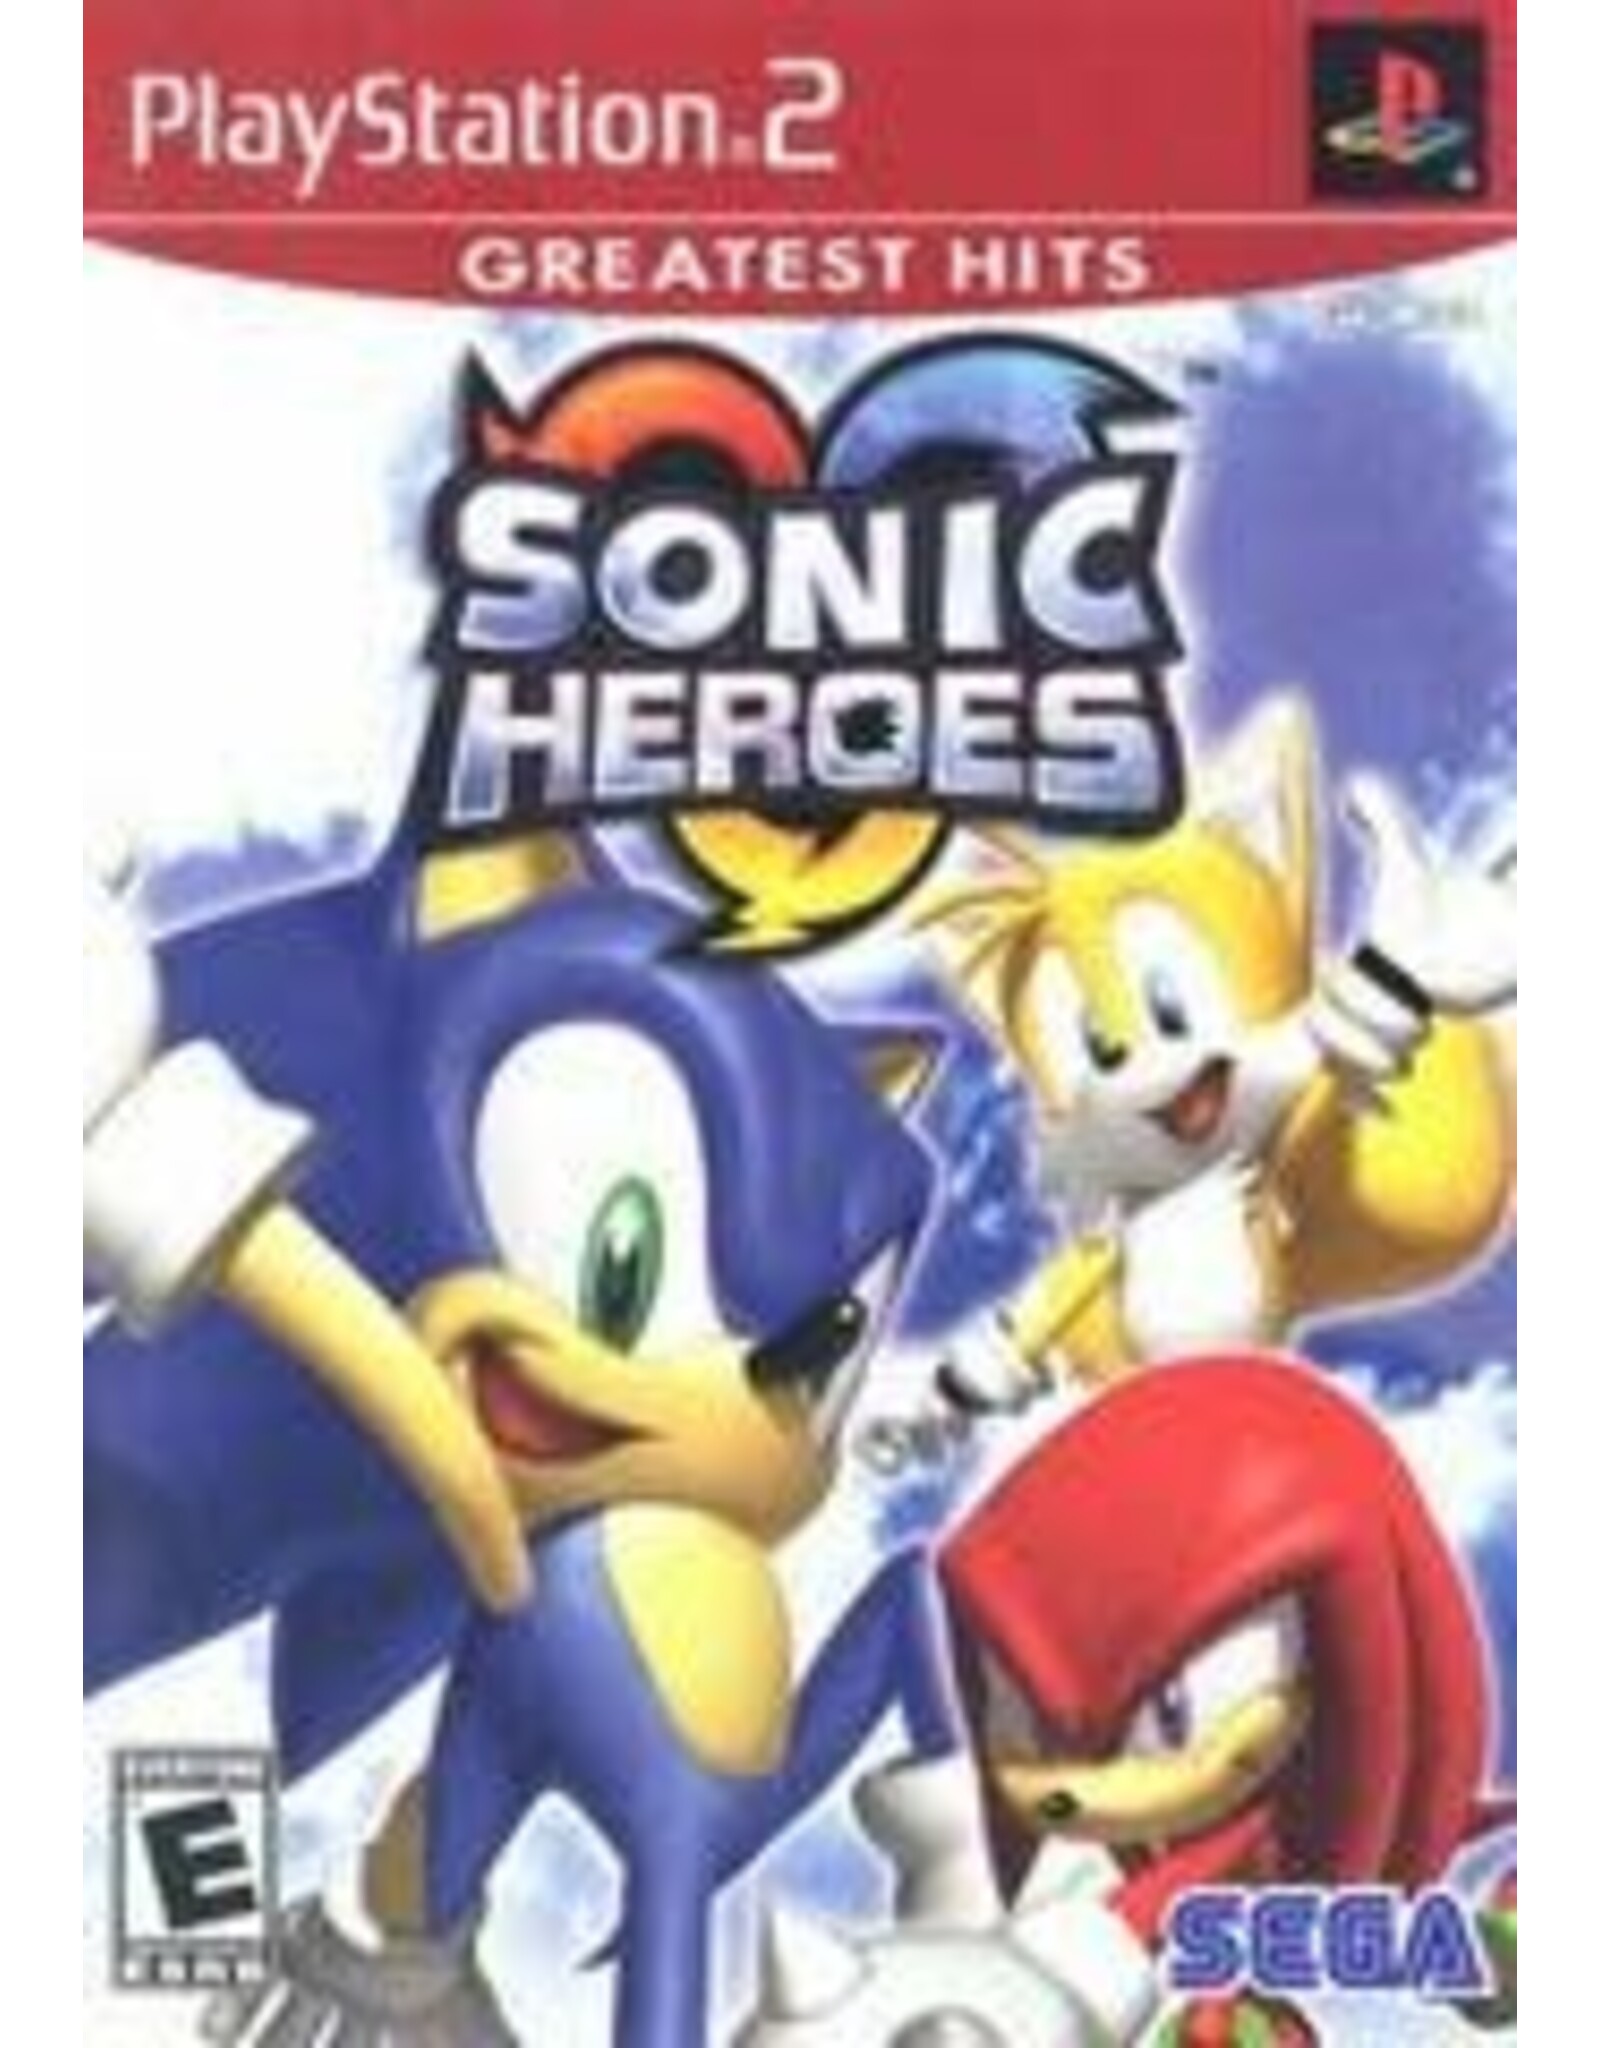 Playstation 2 Sonic Heroes - Greatest Hits (Used)